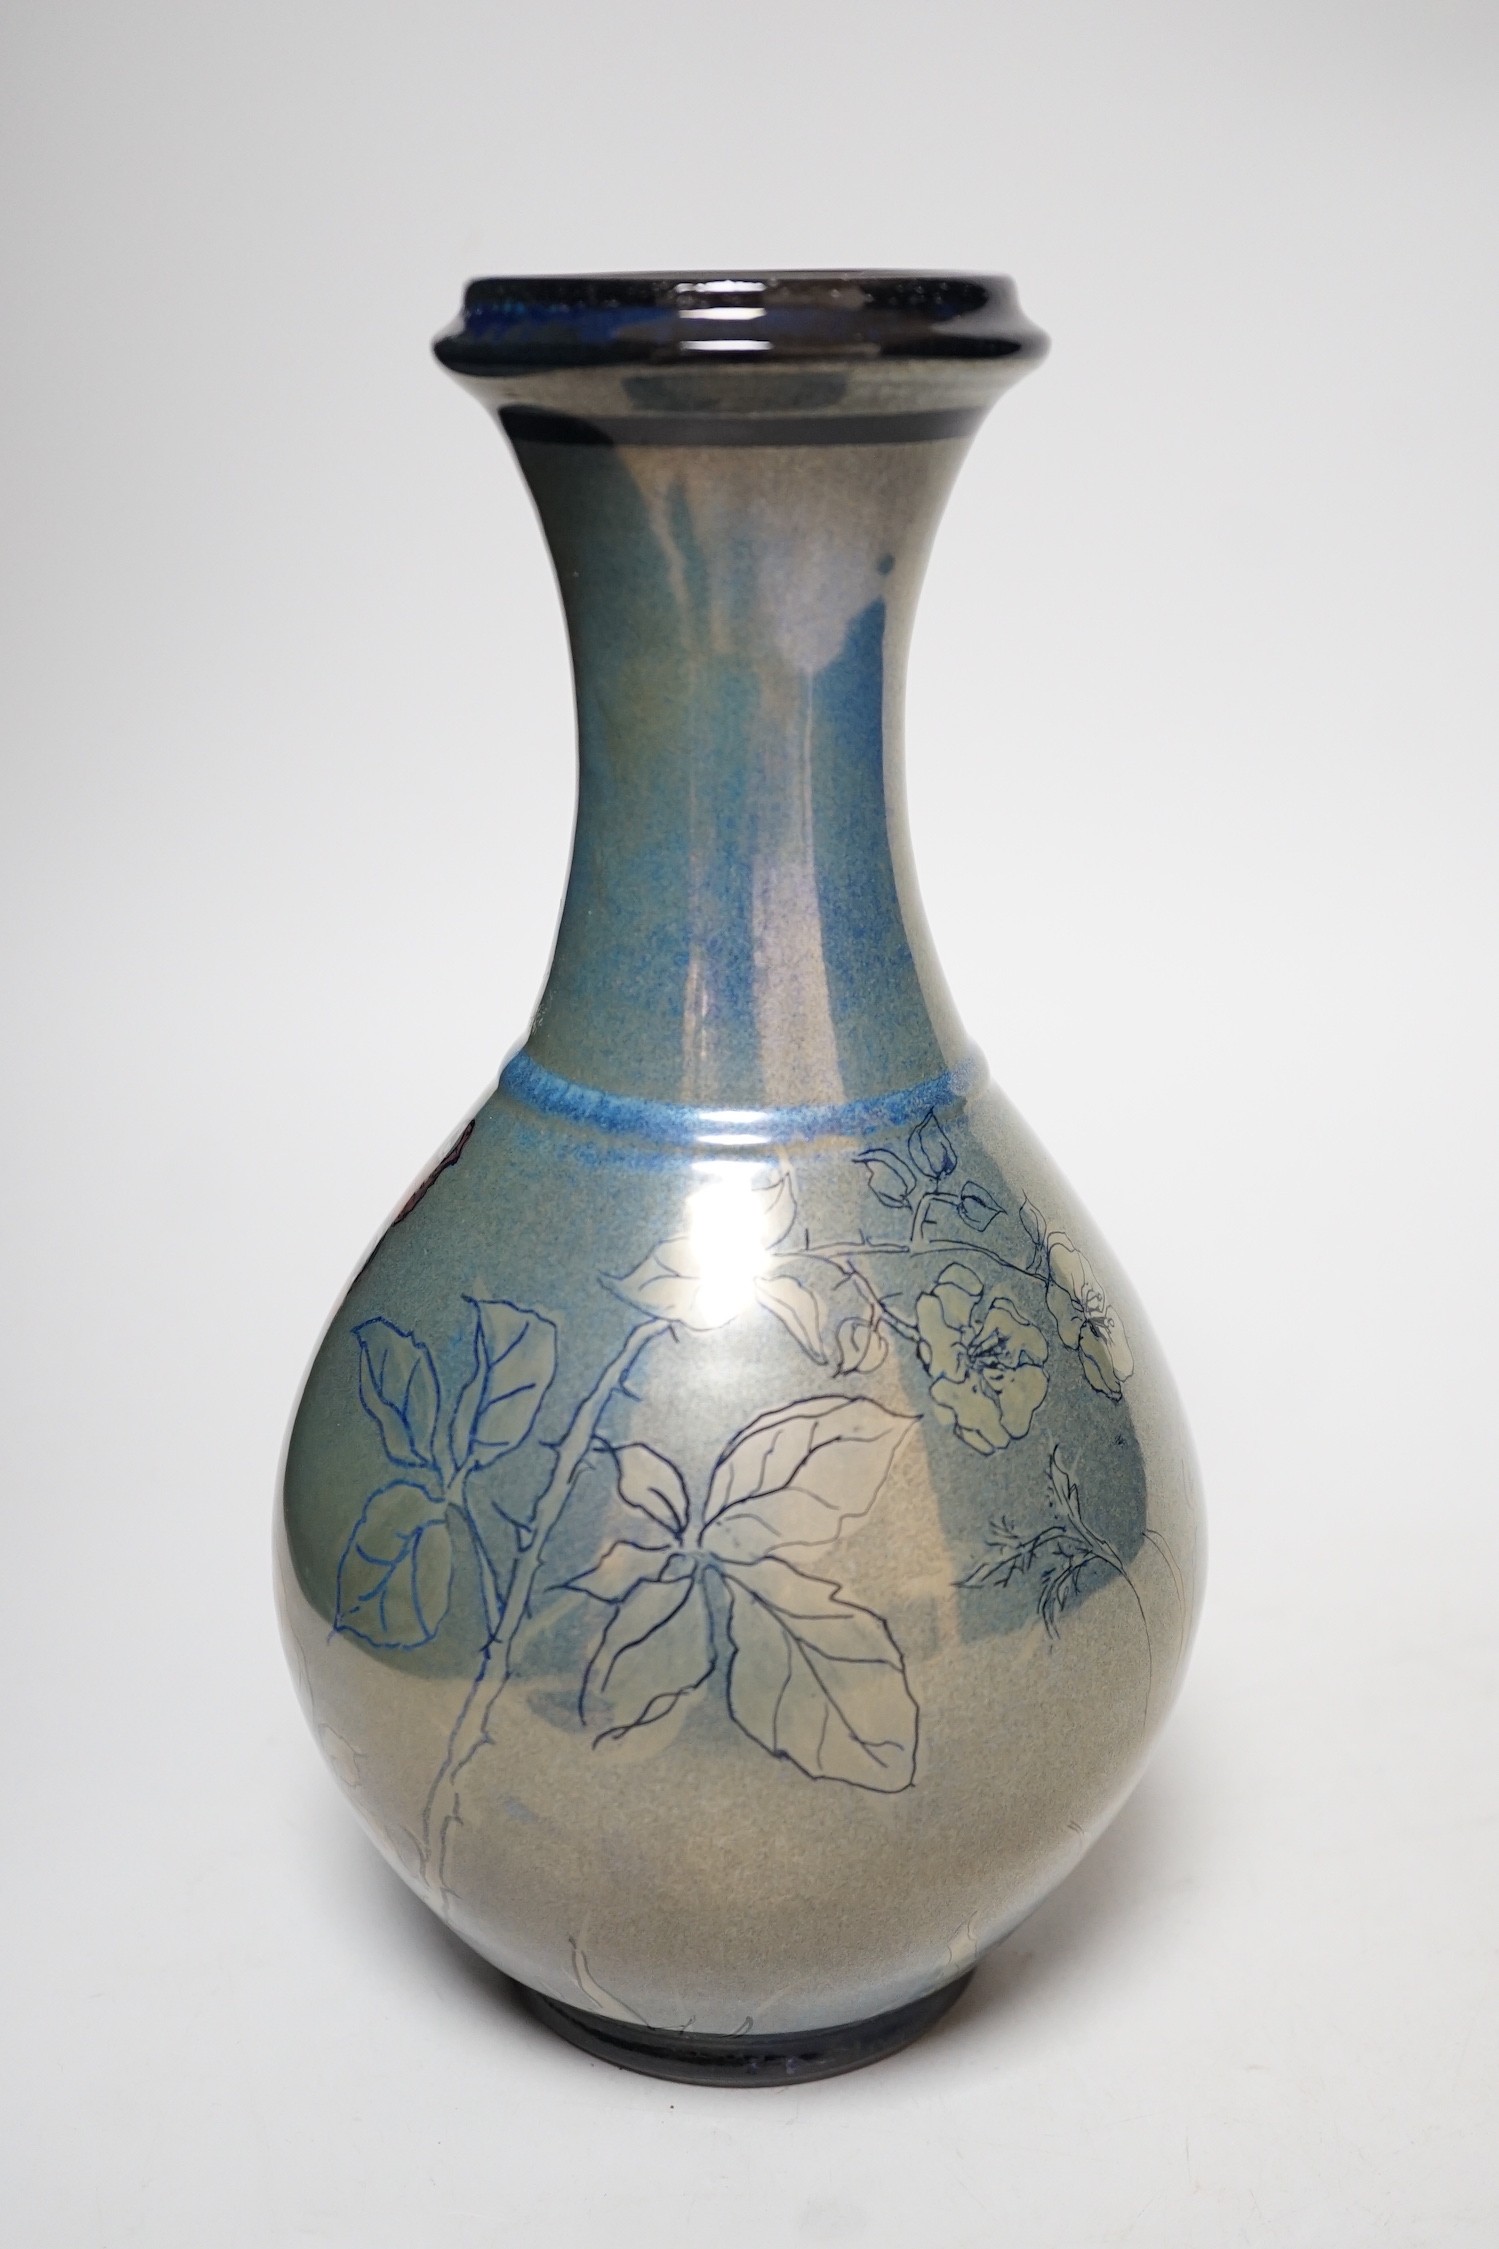 Jonathan Chiswell Jones, a lustre vase - Peacock butterfly and brambles, No 8169, 24cm.